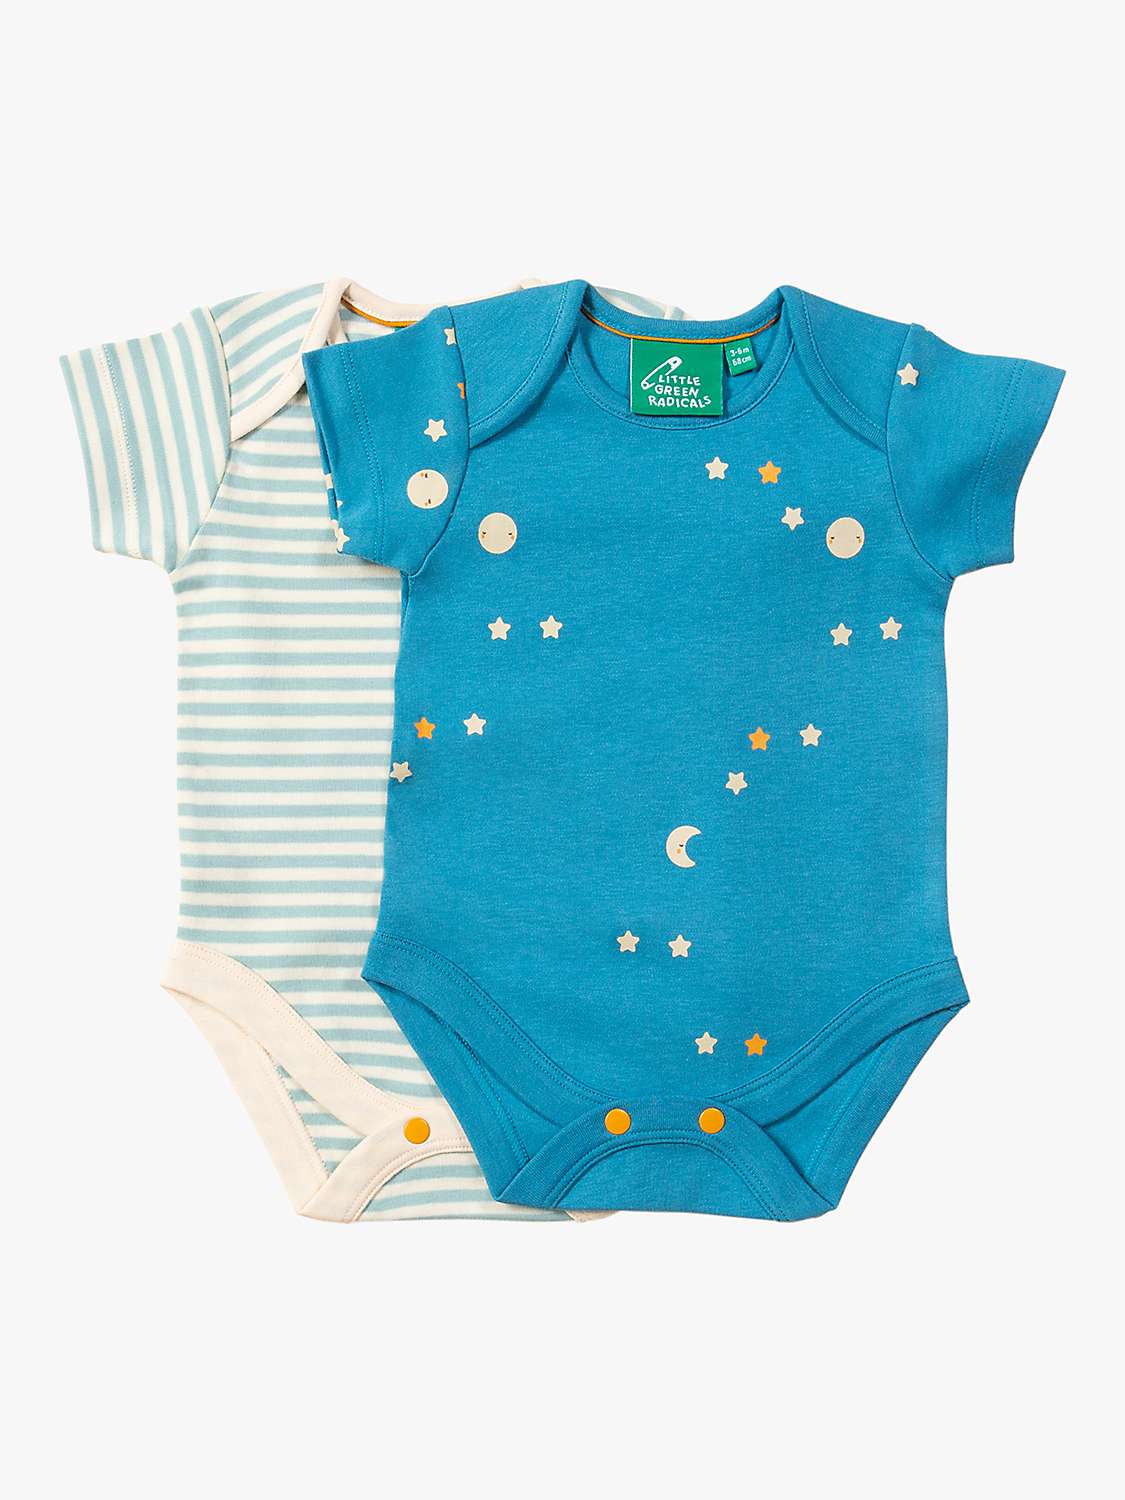 Buy Little Green Radicals Baby Organic Cotton Dawn Bodysuits, Pack of 2, Multi Online at johnlewis.com